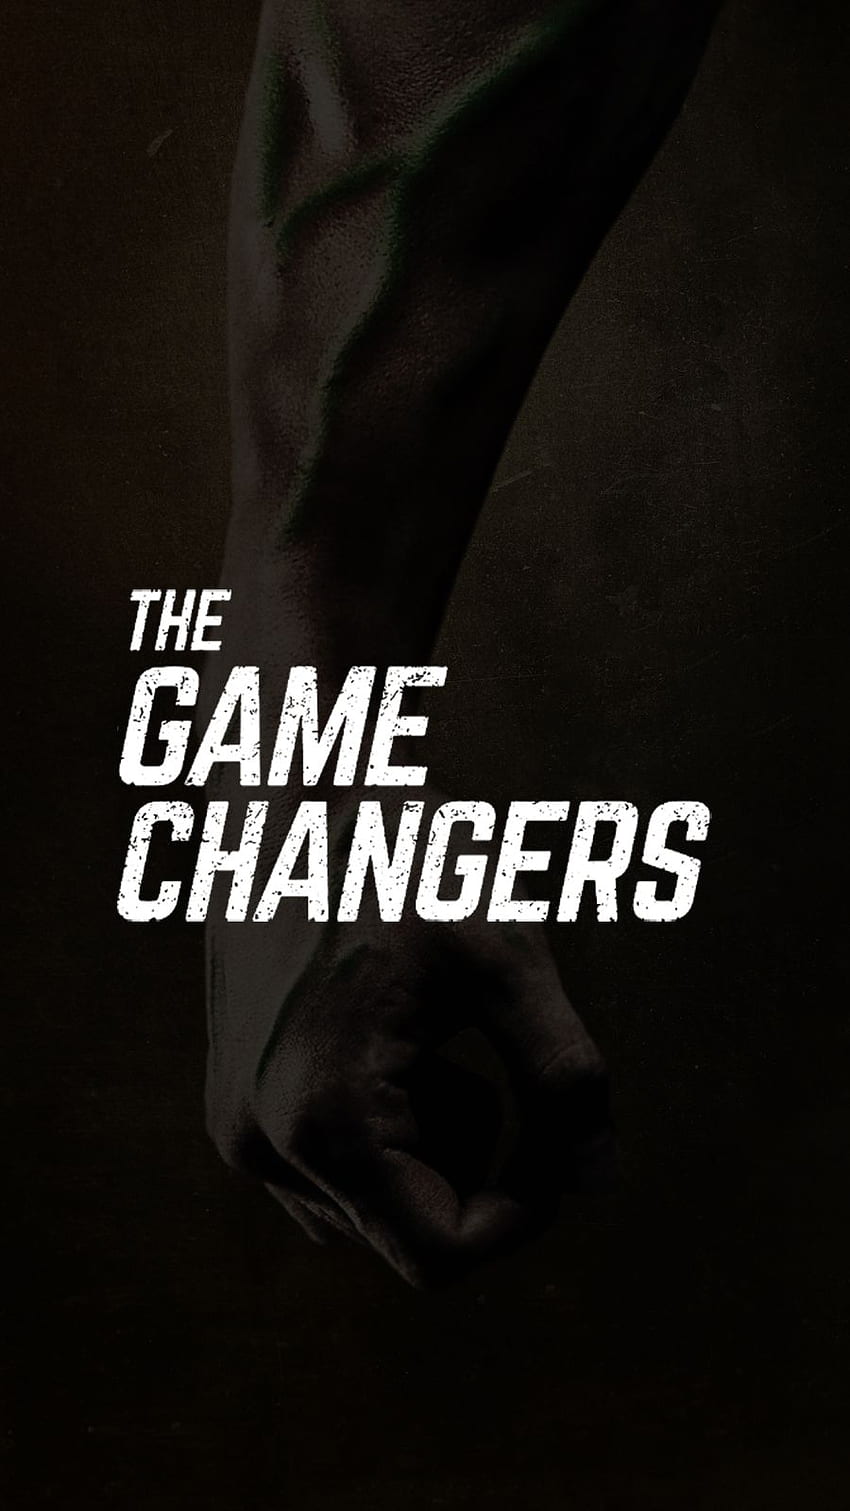 The Game Changers - Phone HD phone wallpaper